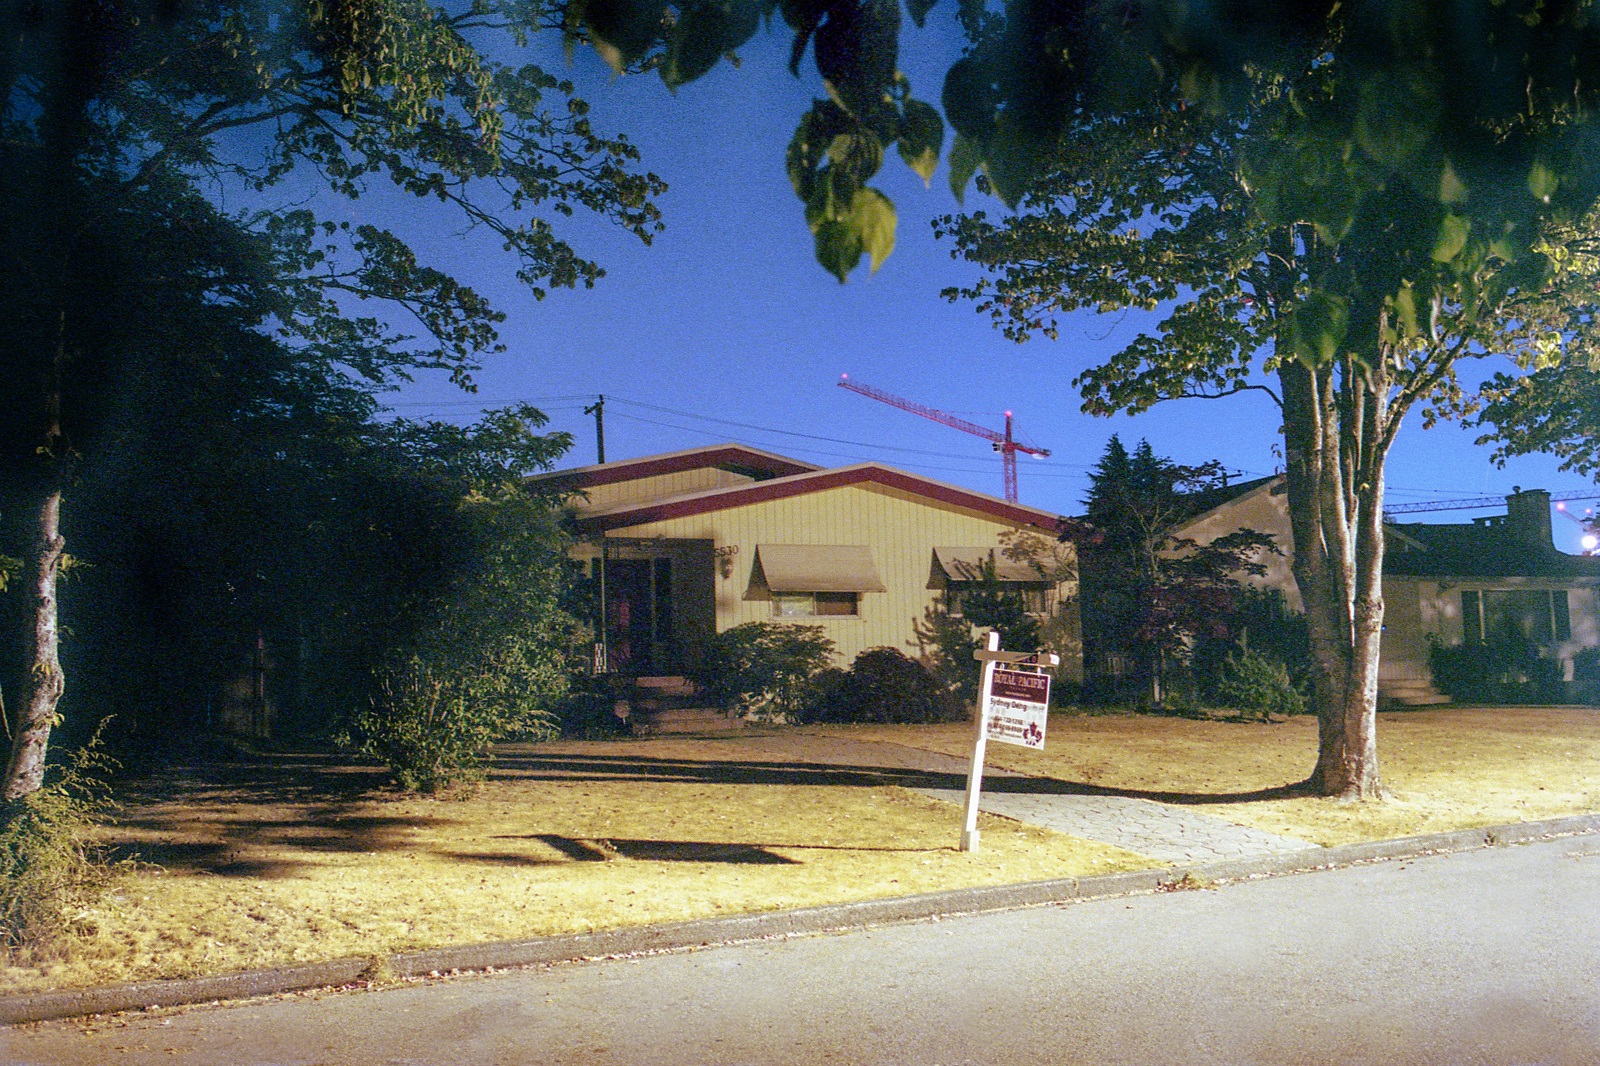 A one-storey beige bungalow lined with shrubbery has a for-sale sign on the front lawn beside a concrete walkway. A blue night sky with construction cranes looms in the background.